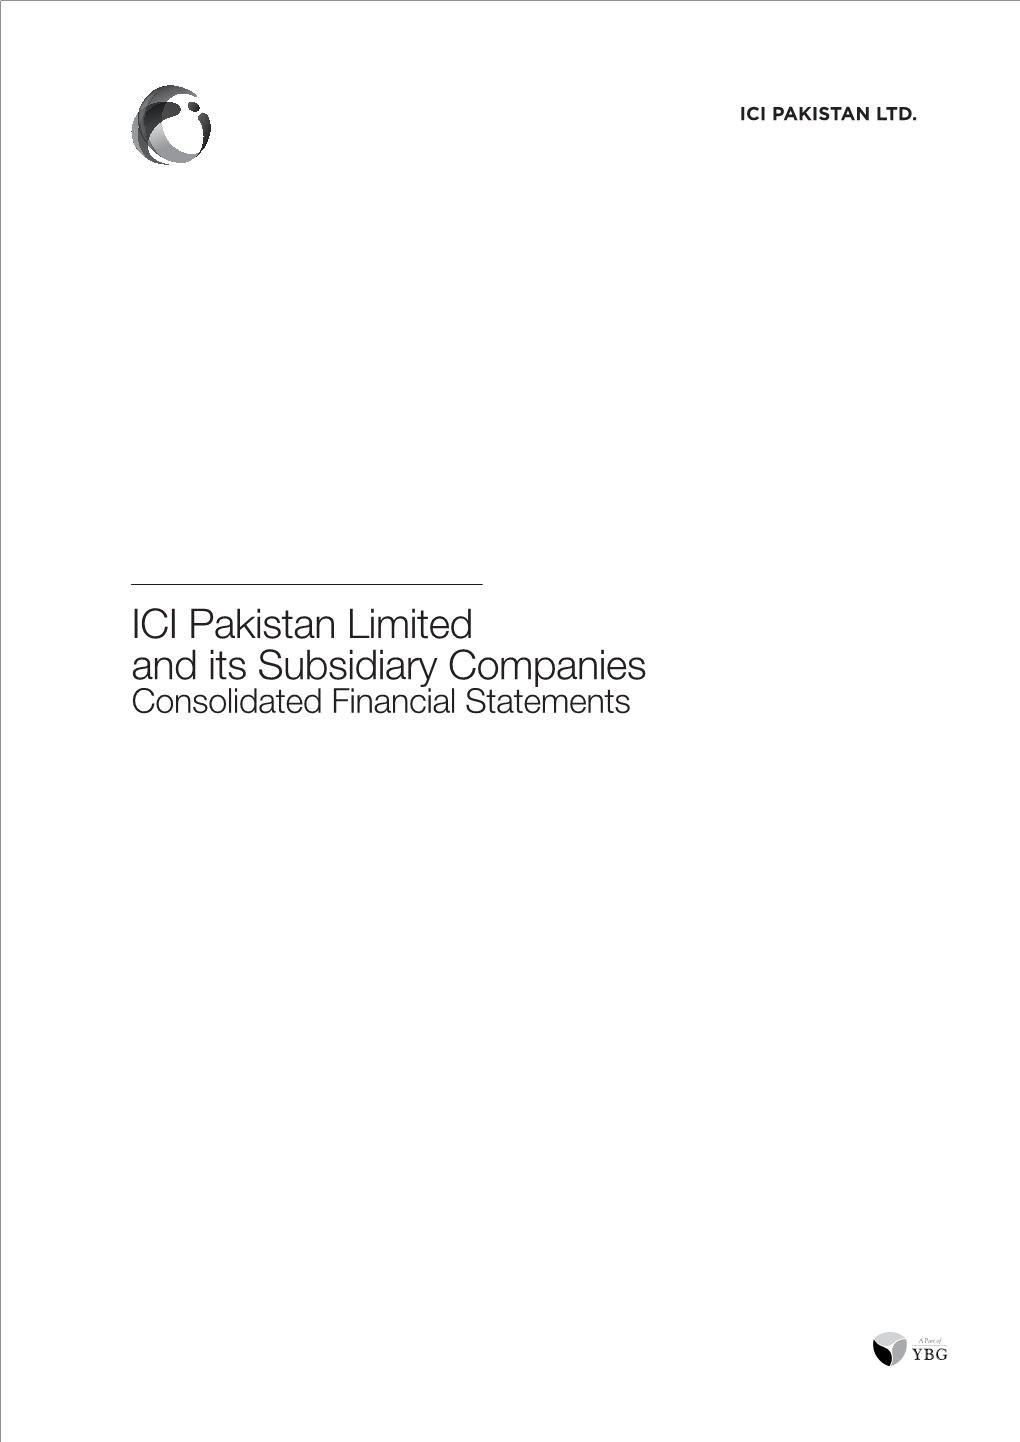 ICI Pakistan Limited and Its Subsidiary Companies